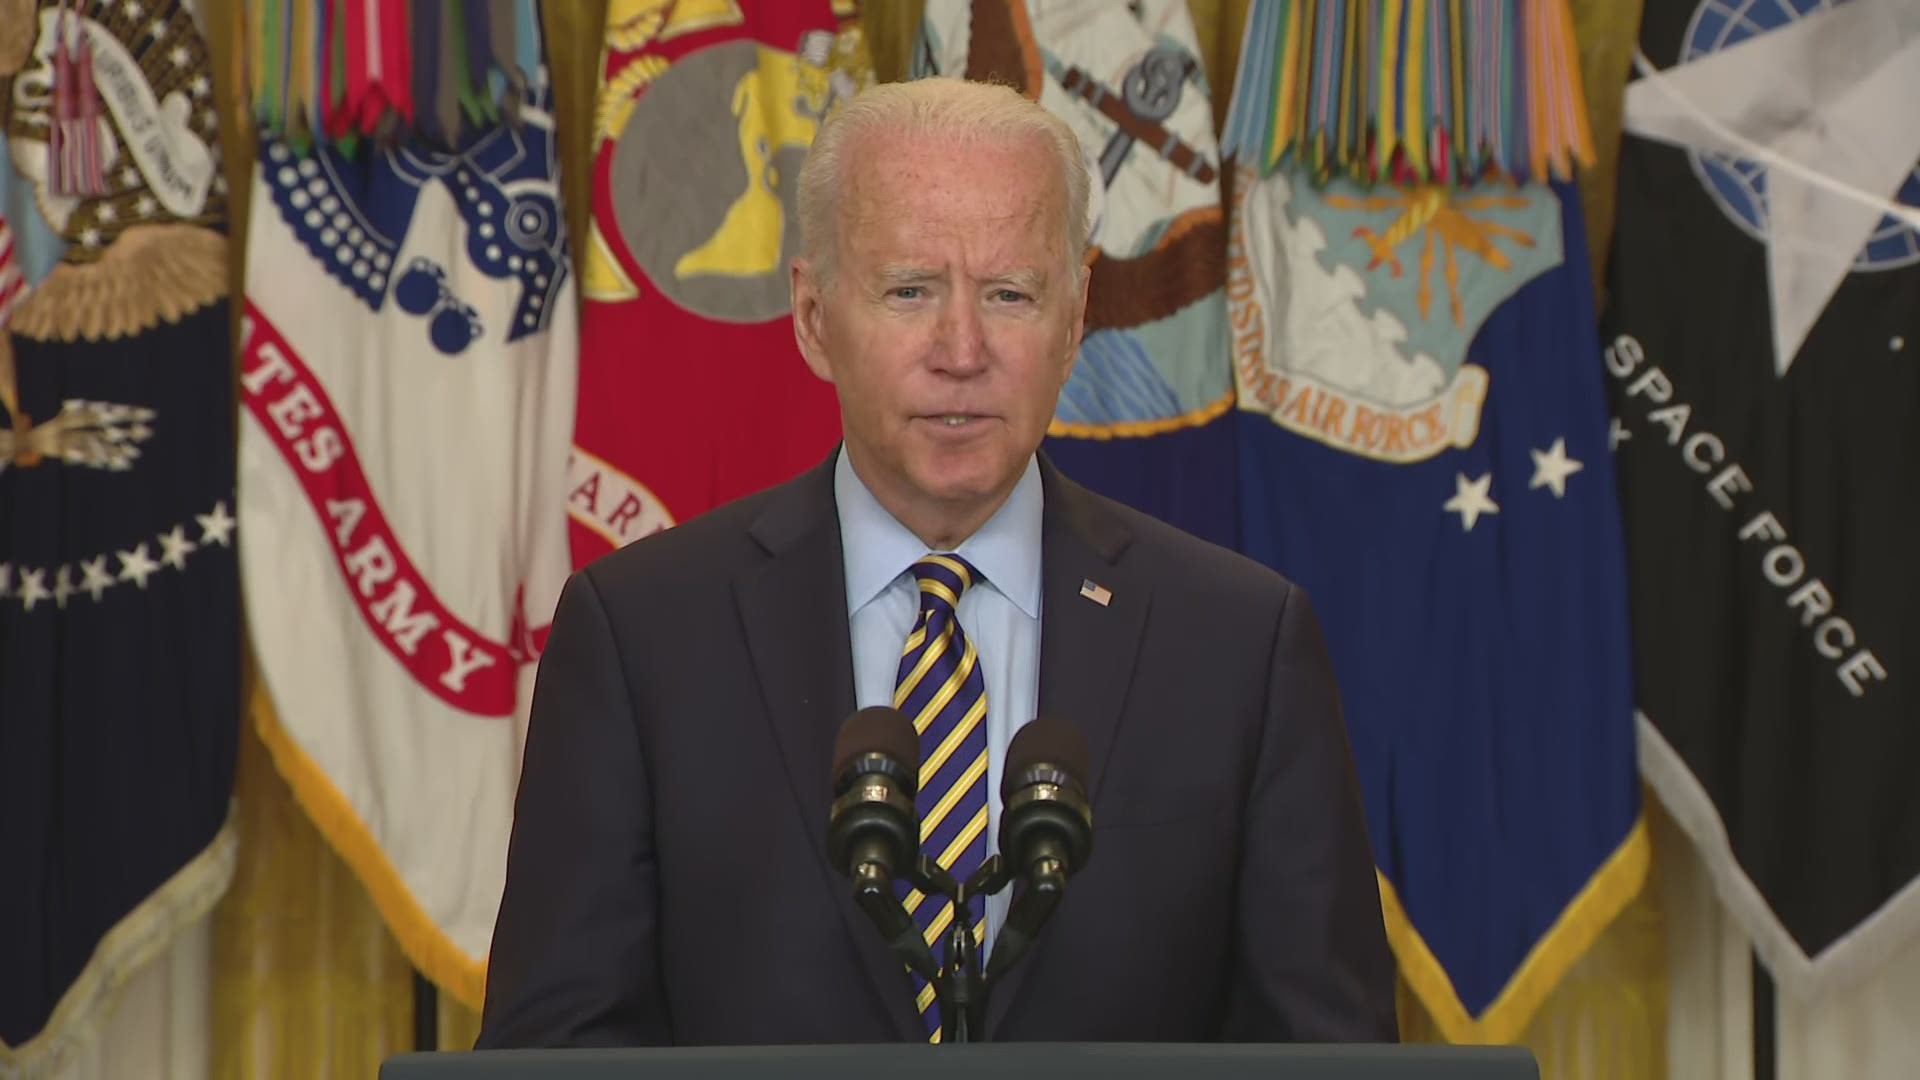 President Joe Biden provided an update Thursday on the largely completed U.S. troop withdrawal from Afghanistan.